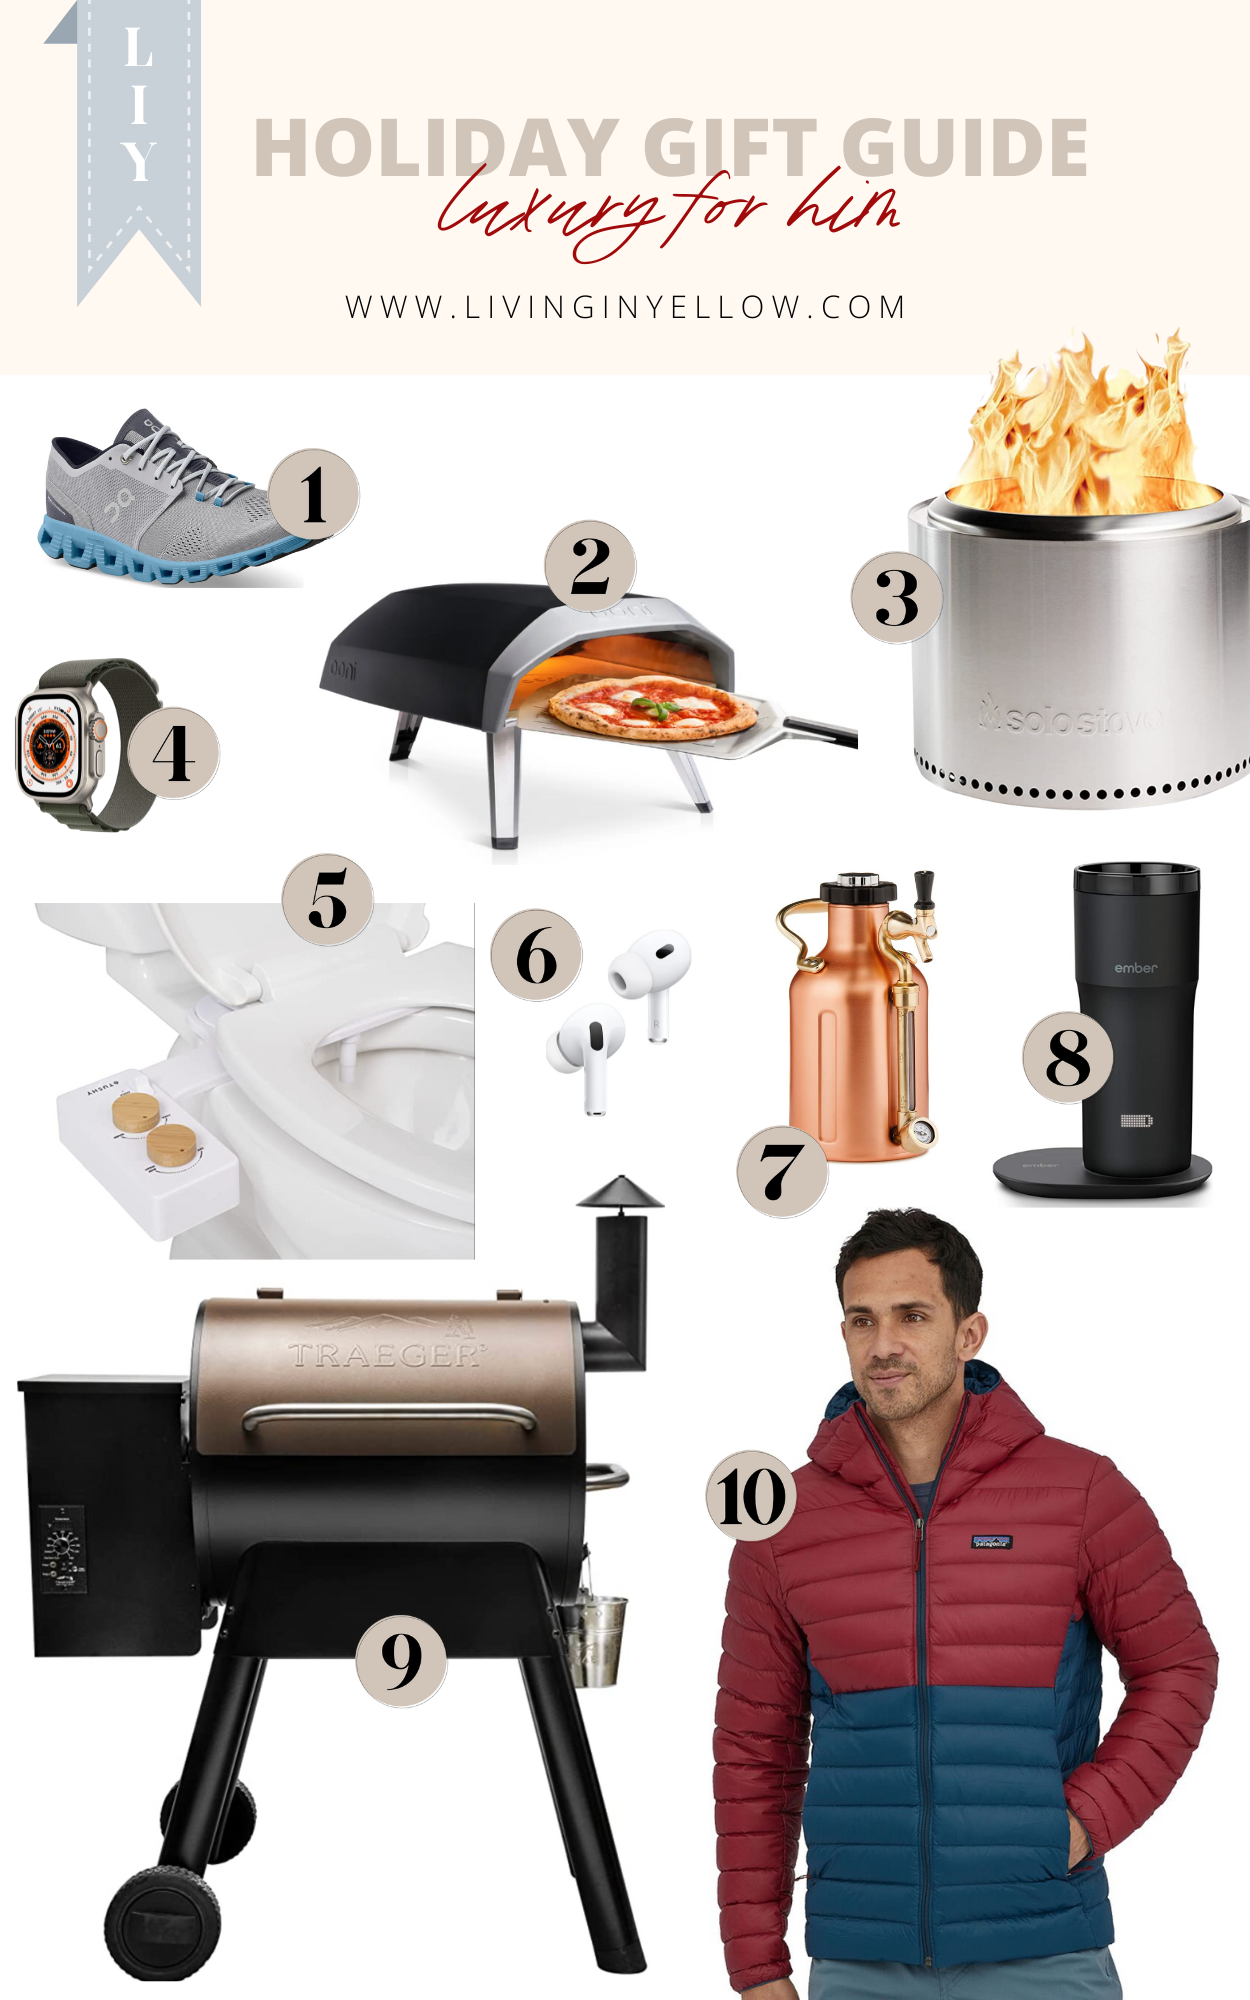 HOLIDAY GIFT GUIDES FOR HIM + HER FROM STORE5a - The Dandy Liar